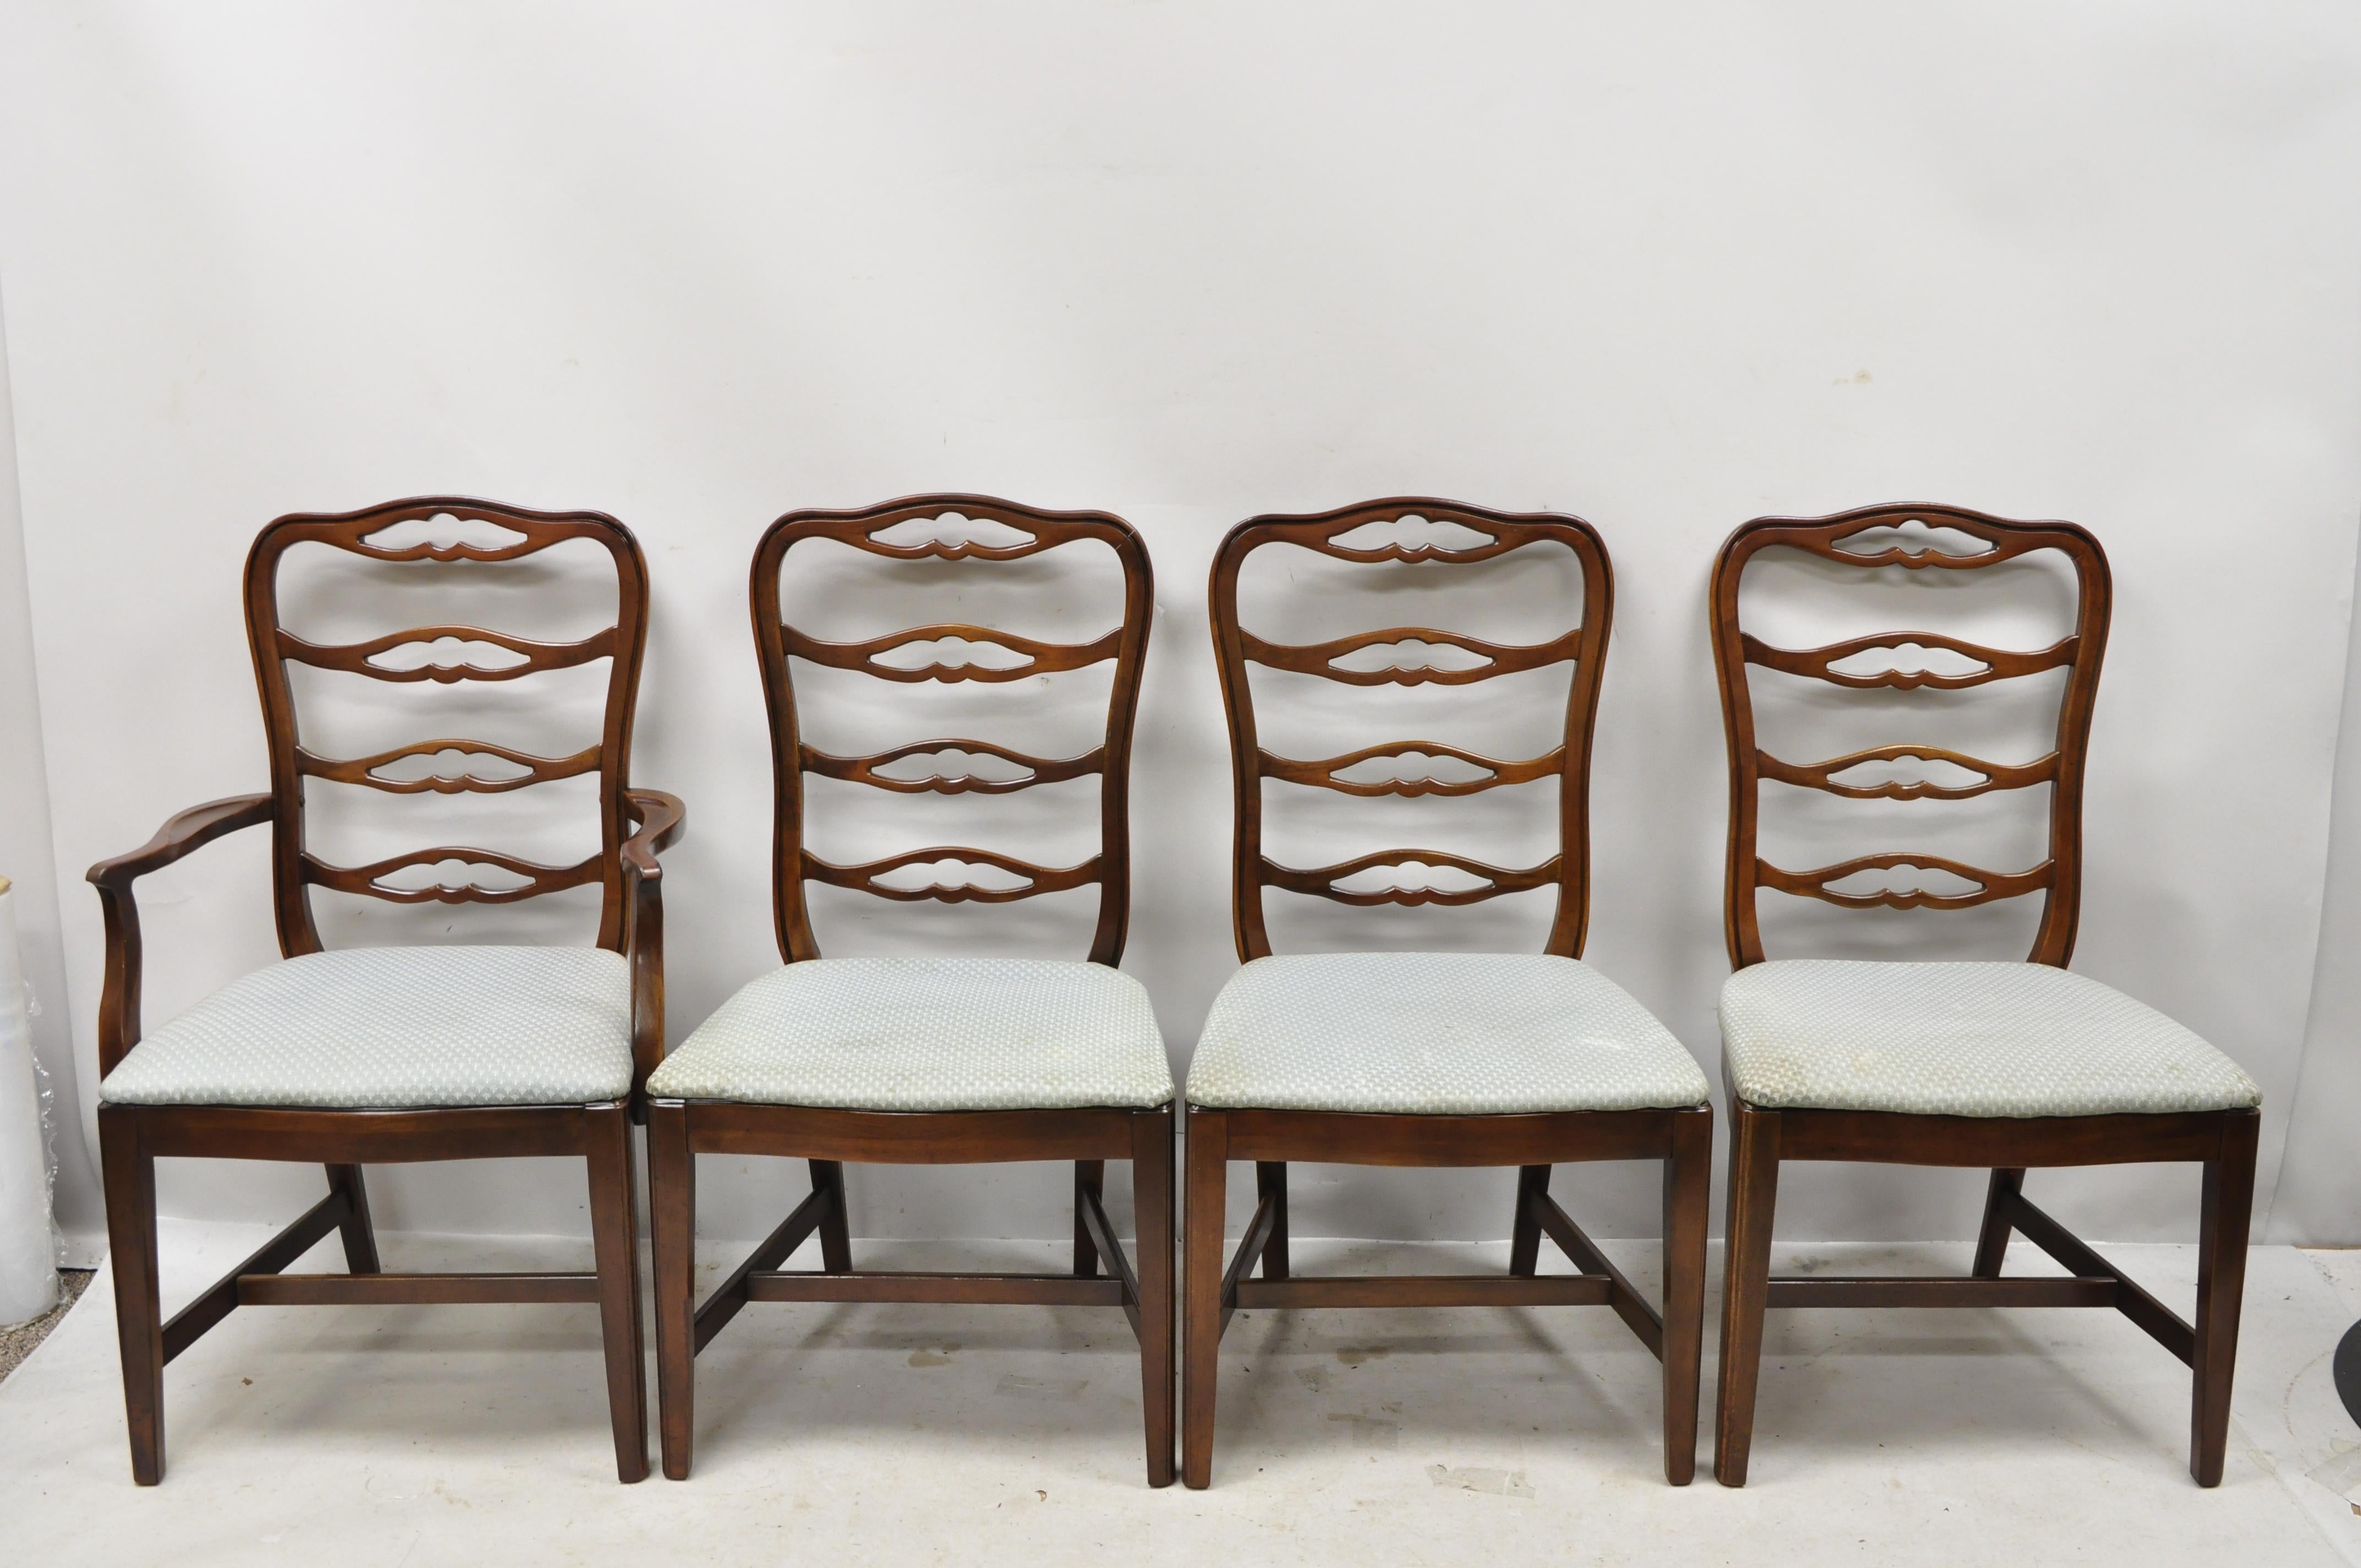 Vintage Thomasville mahogany ladderback ribbon back dining chairs - Set of 6. Set includes (5) side chairs, (1) armchair, original labels, solid wood construction, quality American craftsmanship, circa mid- late 20th century. Measurements: Armchair: